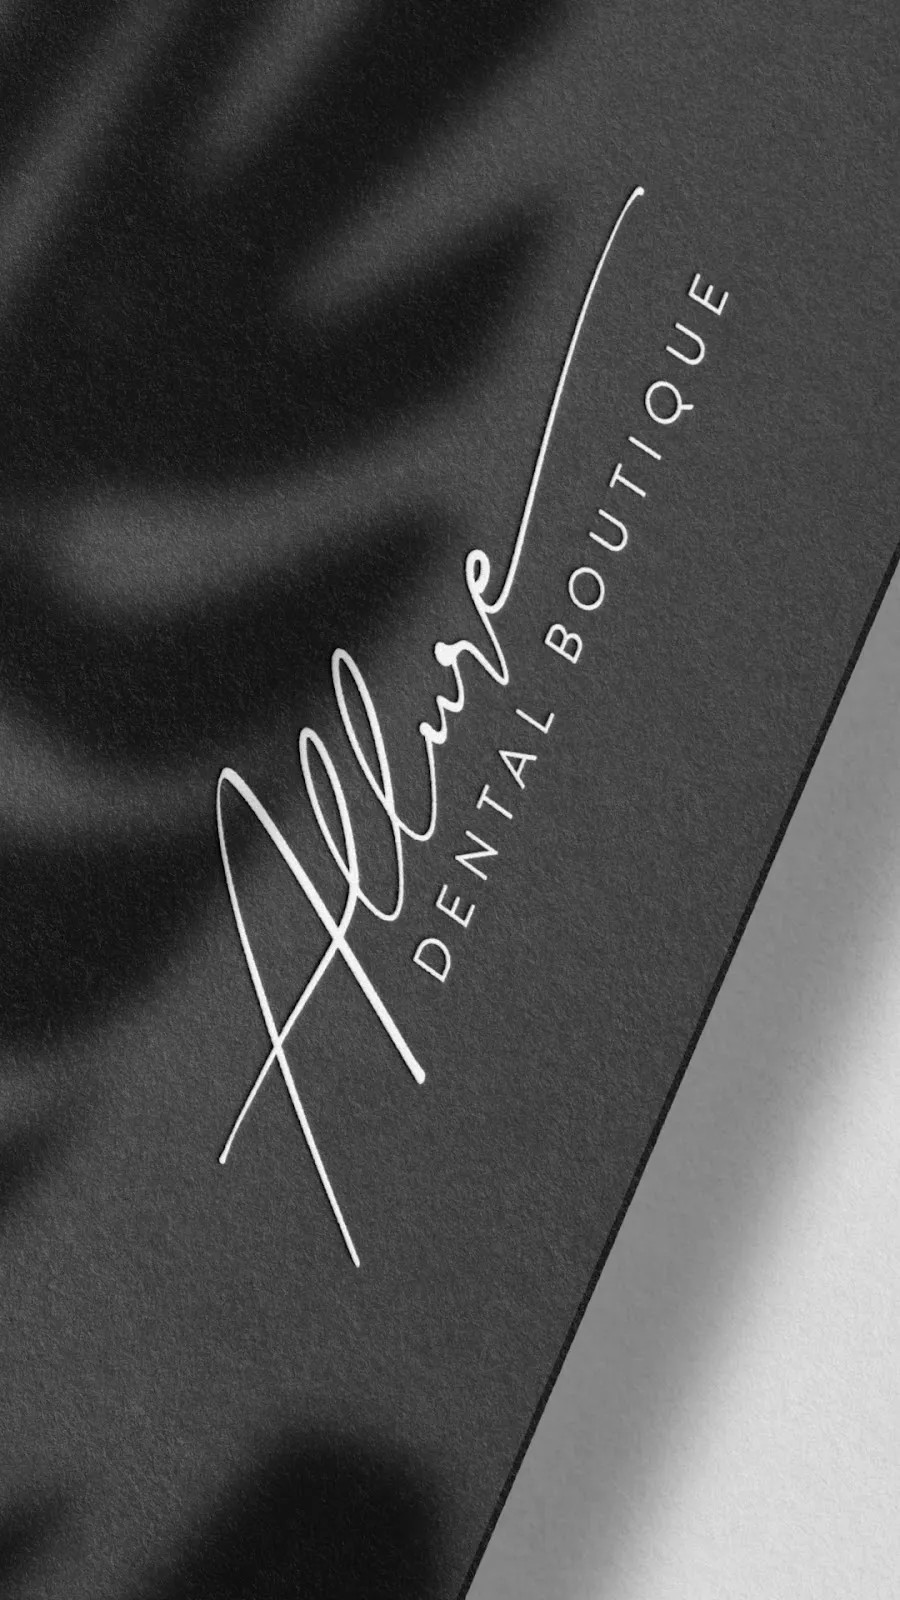 Elegant black business card for allure dental boutique featuring sophisticated white cursive logo with soft shadow effect.